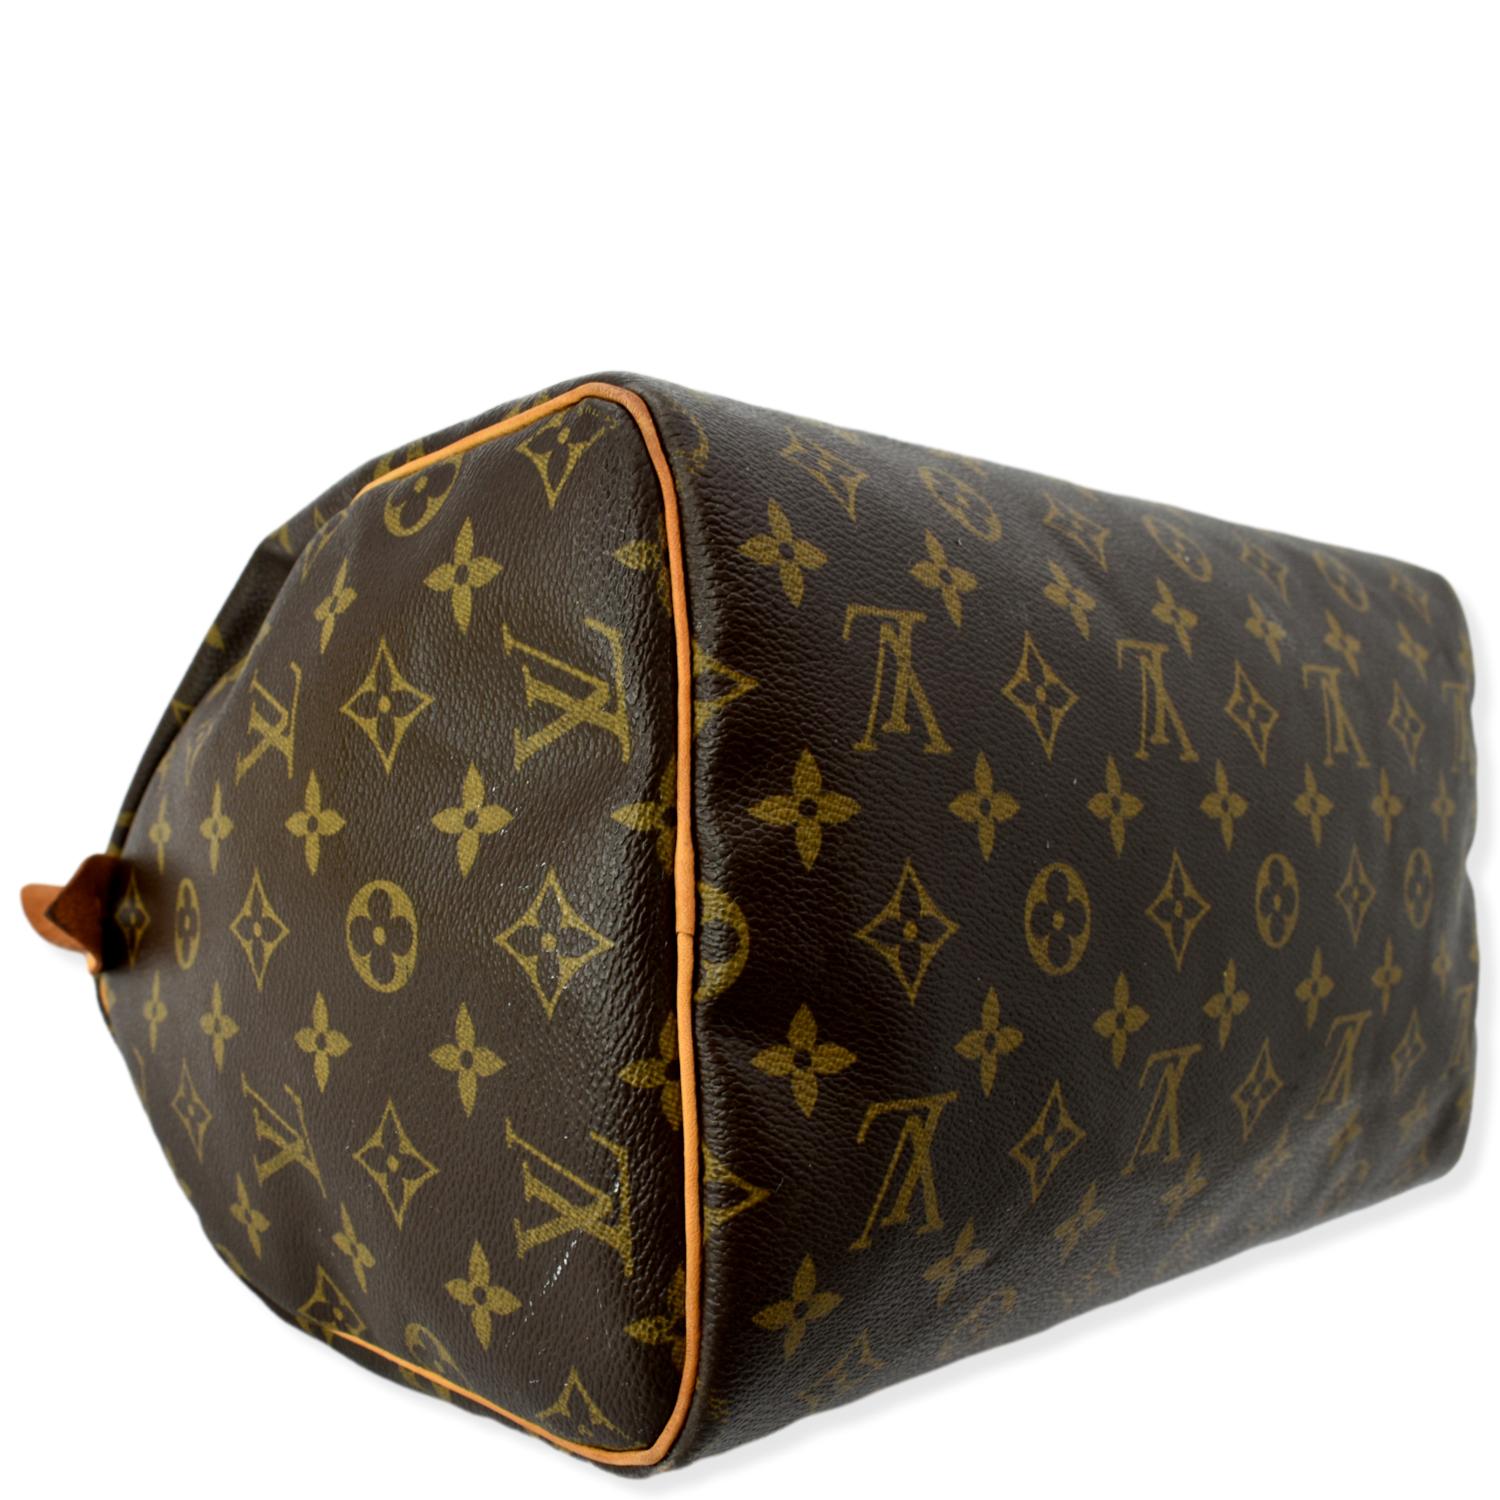 Shop for Louis Vuitton Sienna Brown Epi Leather Speedy 30 cm Satchel Bag -  Shipped from USA